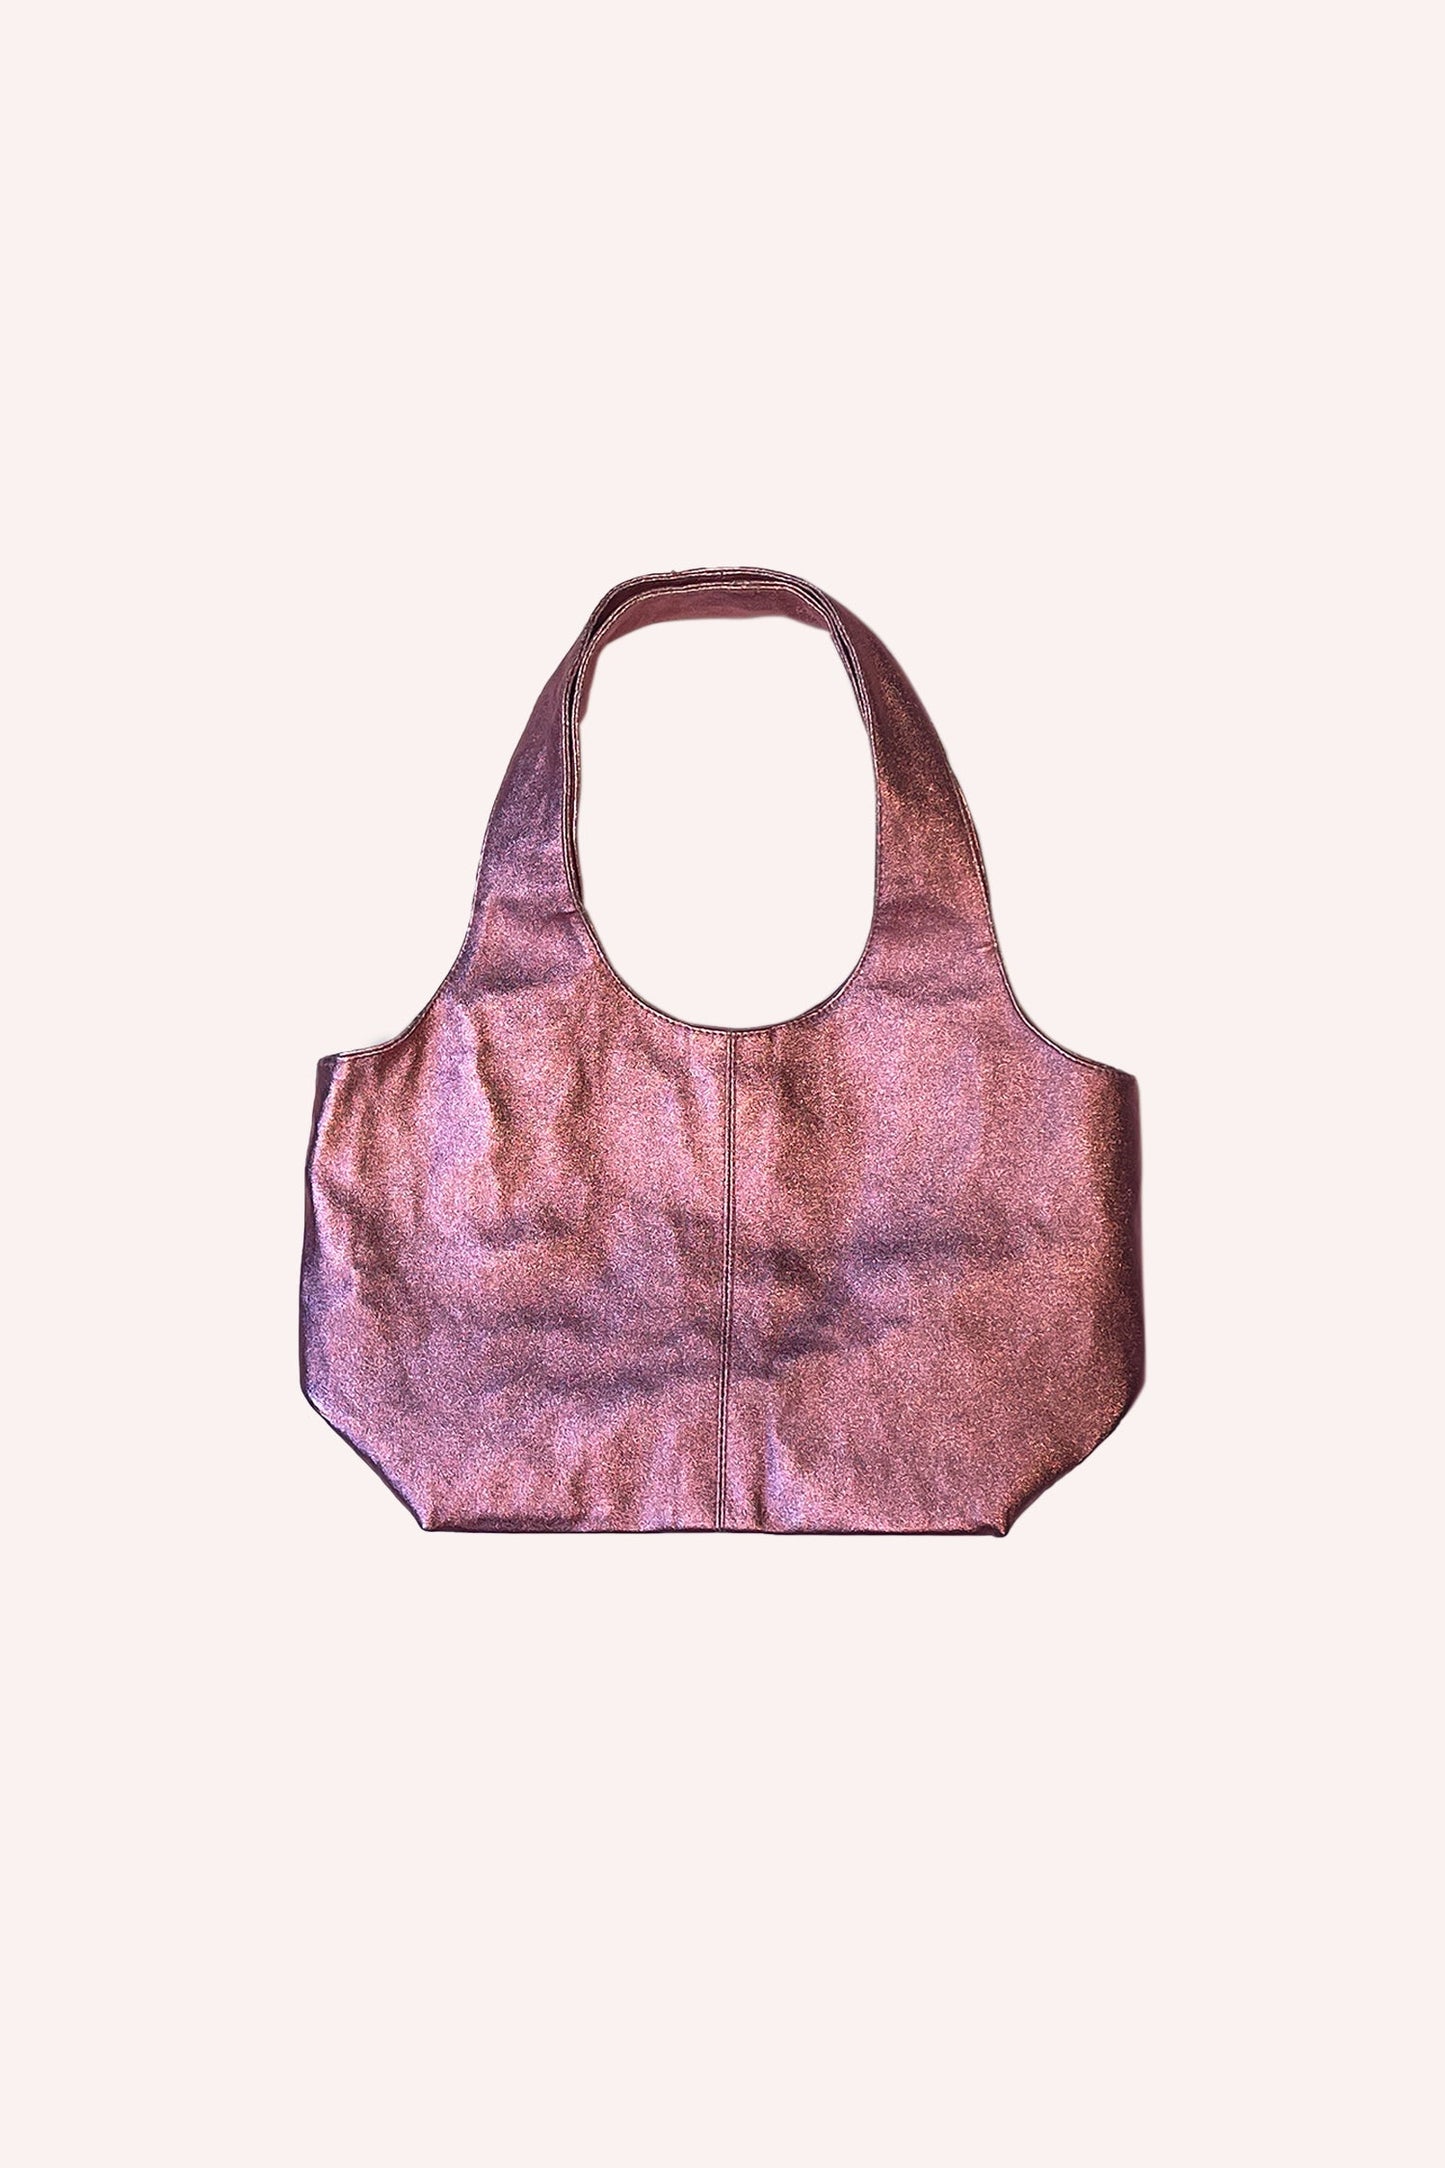 Metallic Faux Leather Mini Bag Bubblegum is in rectangle shape, with 2 round handles